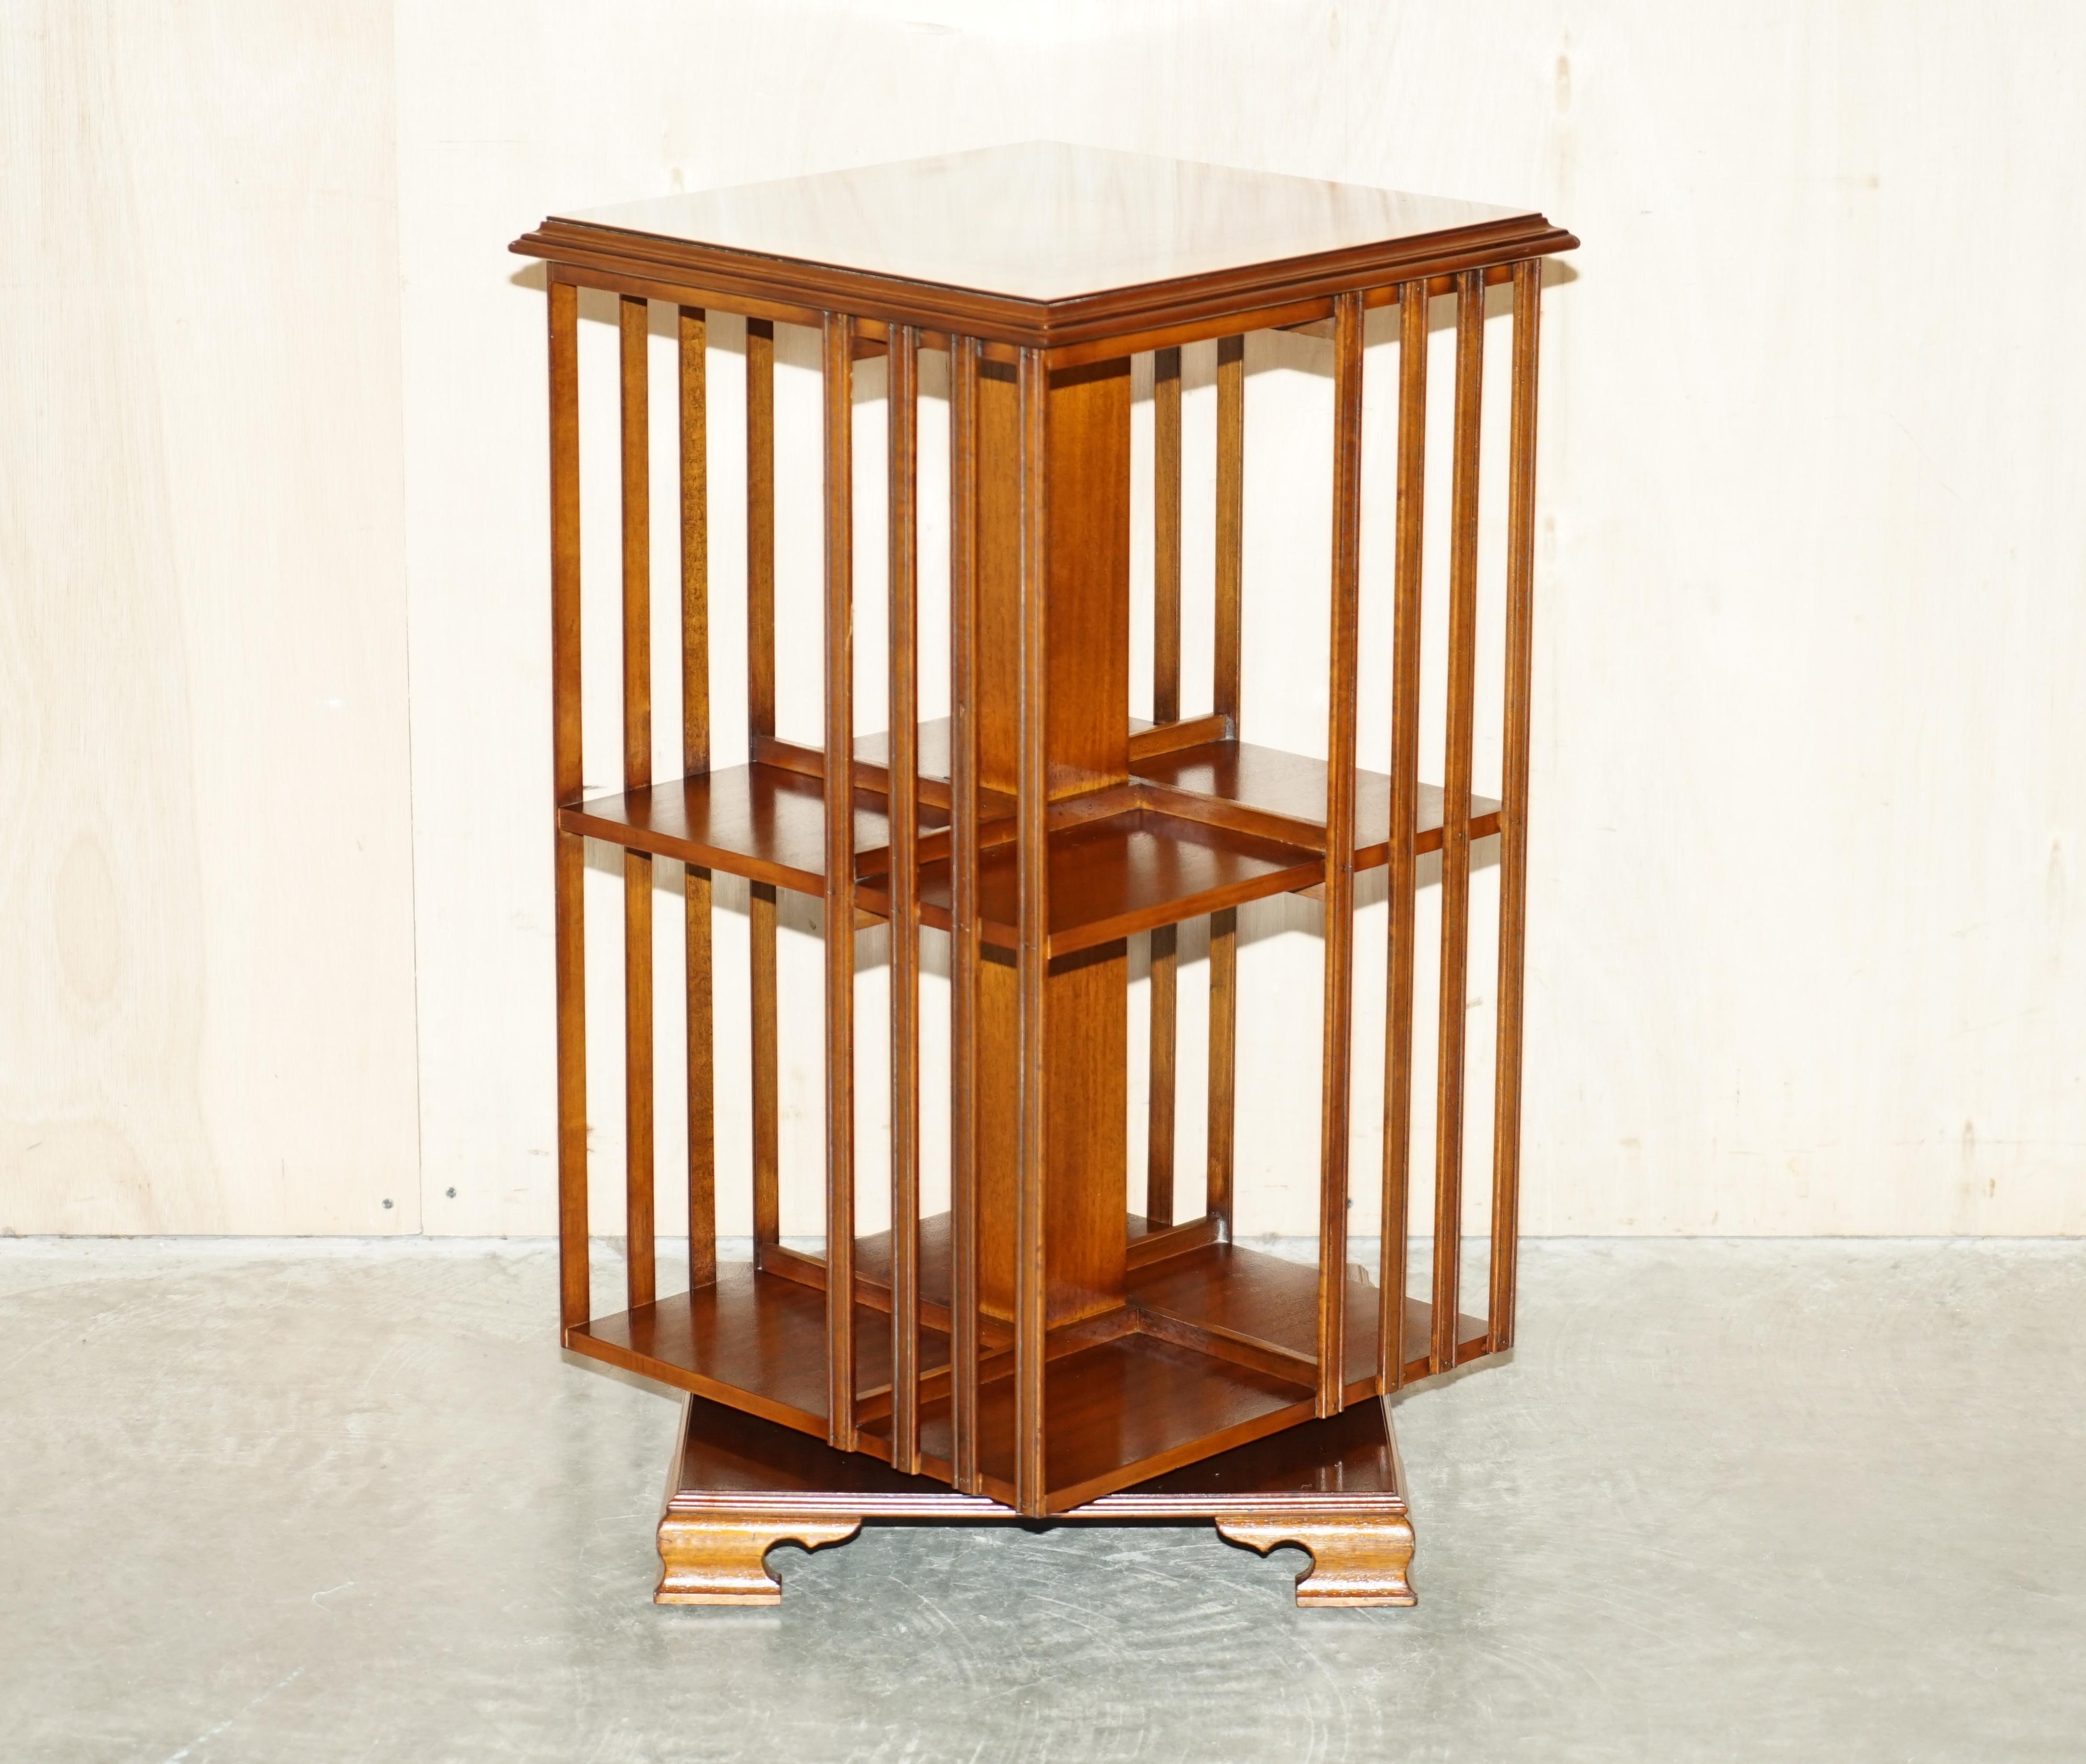 We are delighted to offer for sale this stunning circa 1920 Walnut & Satinwood revolving bookcase with Sheraton inlay to the top.

An exceptionally well made and highly decorative library bookcase. This is a very versatile piece of furniture that